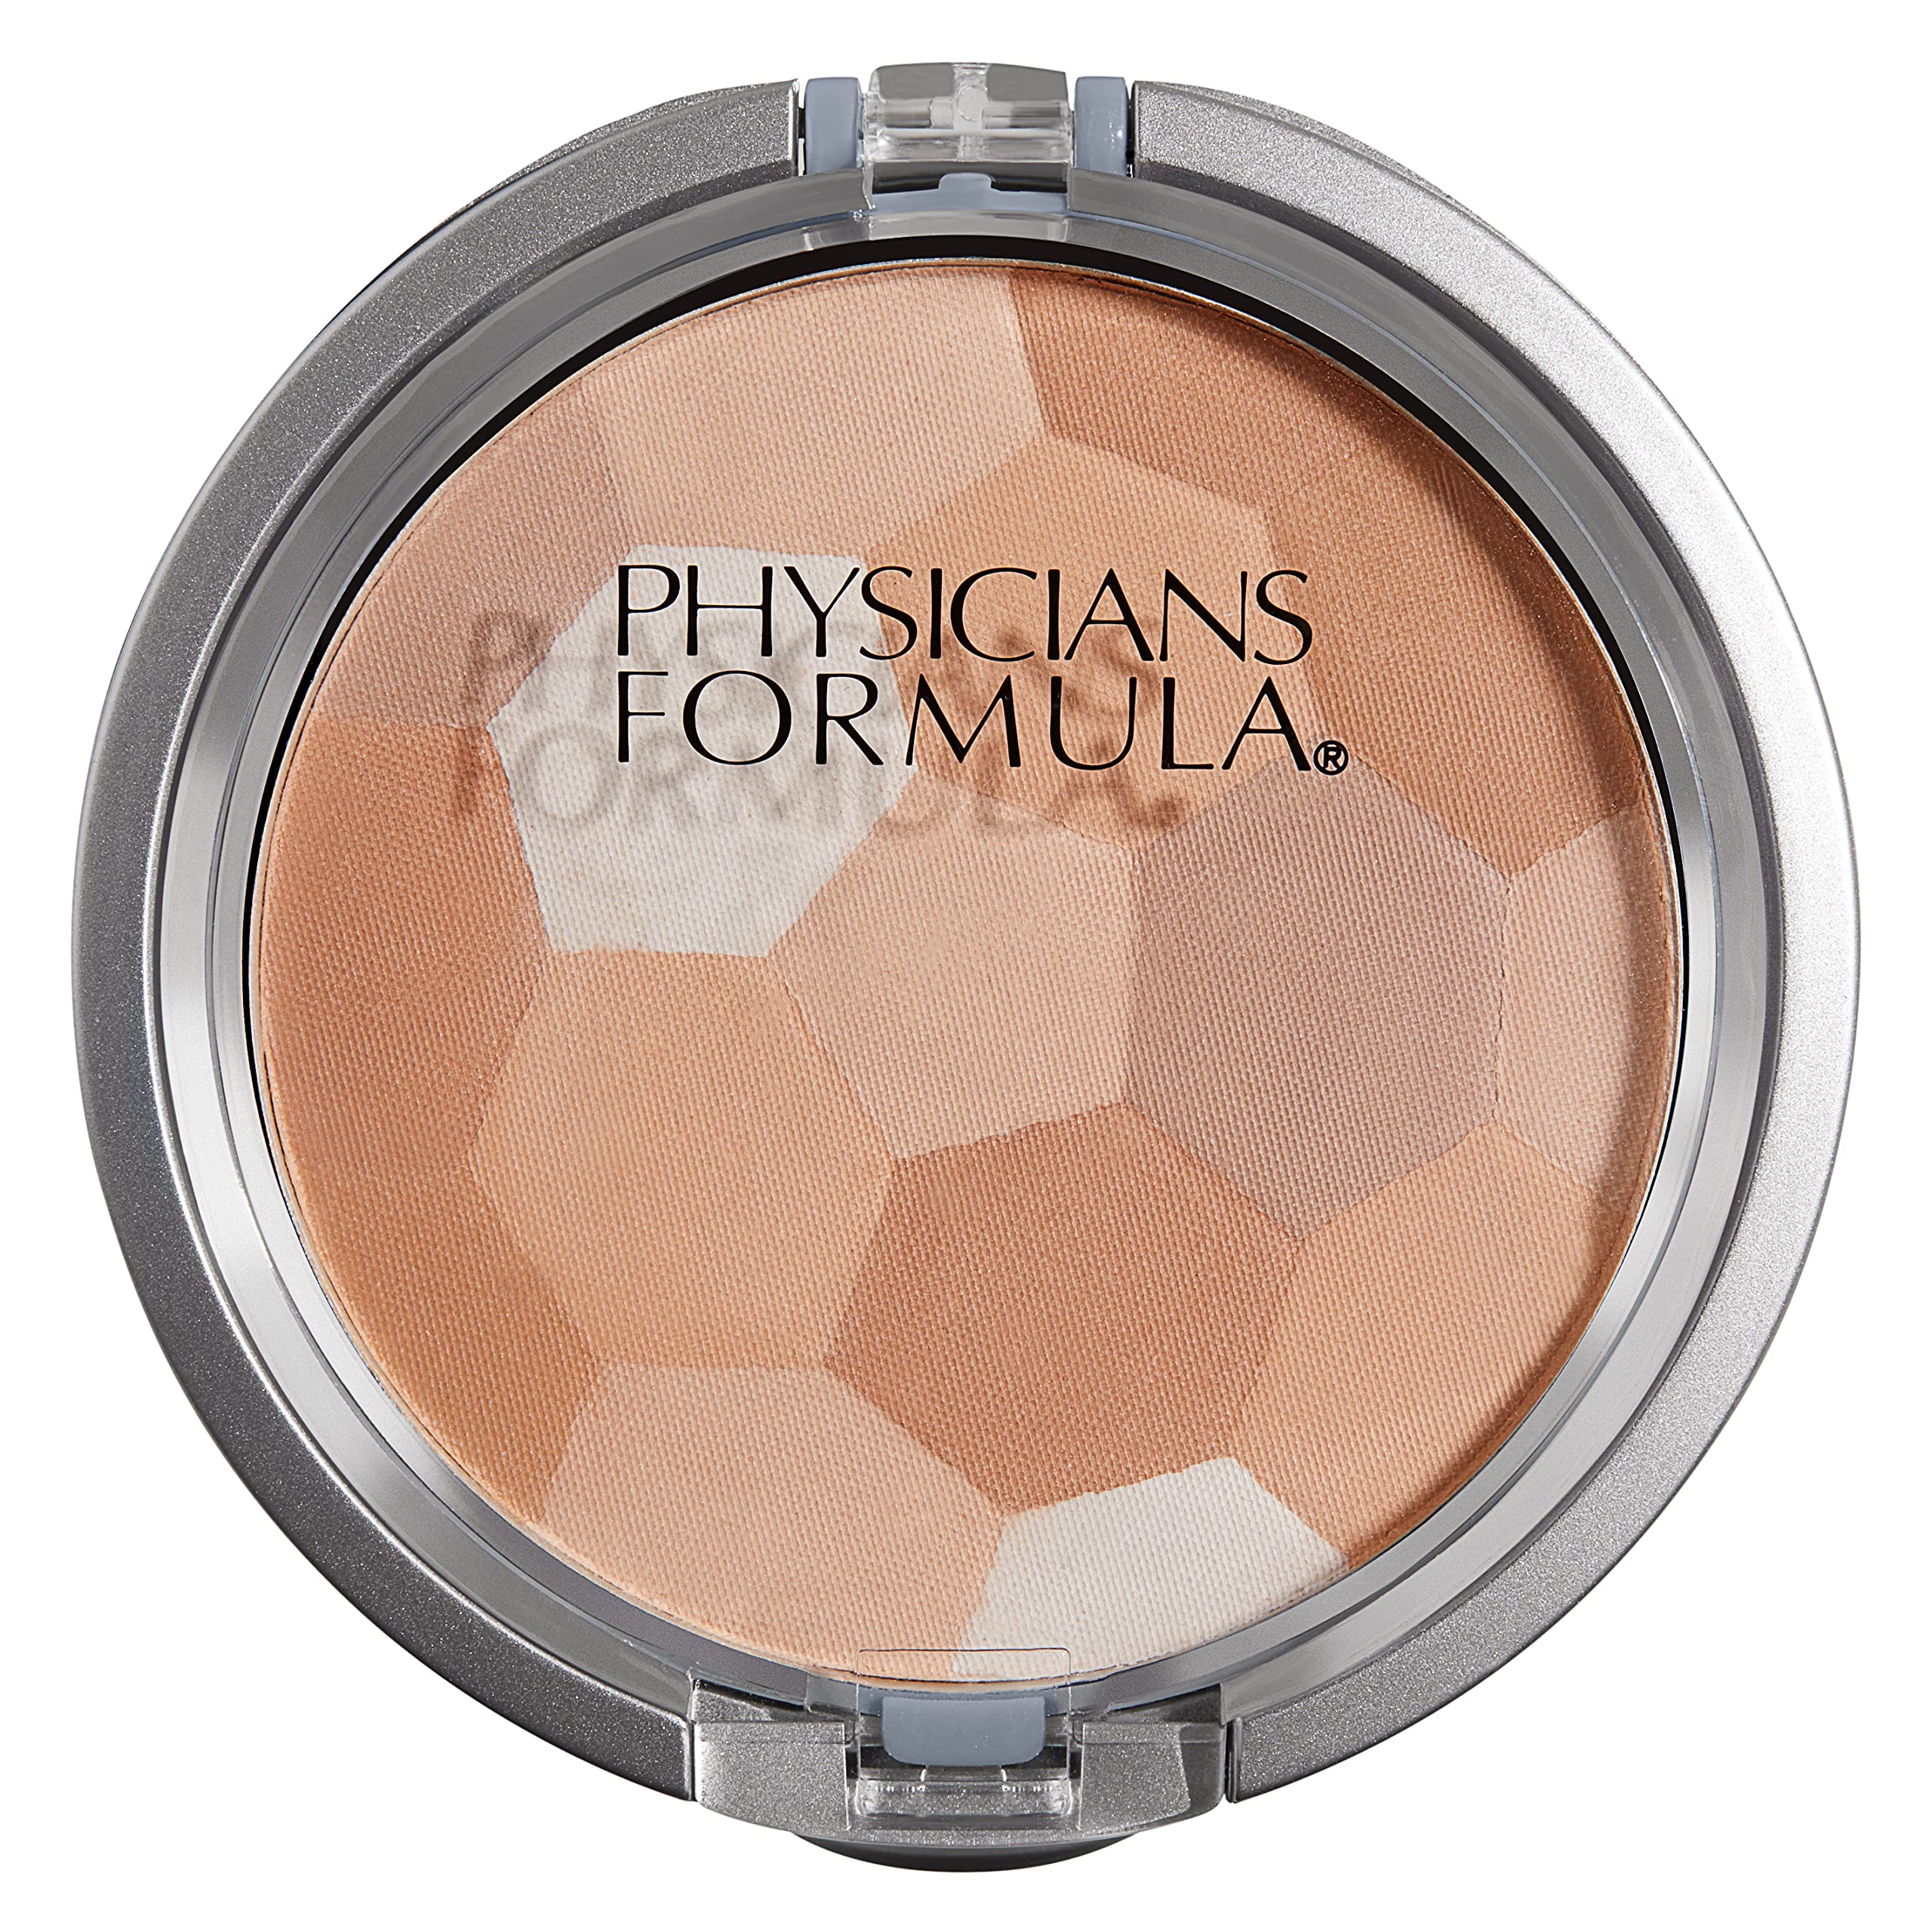 Physicians Formula Setting Powder Palette Multi-Colored Pressed Finishing Powder Translucent, Natural Coverage, Dermatologist Tested, Clinicially Tested